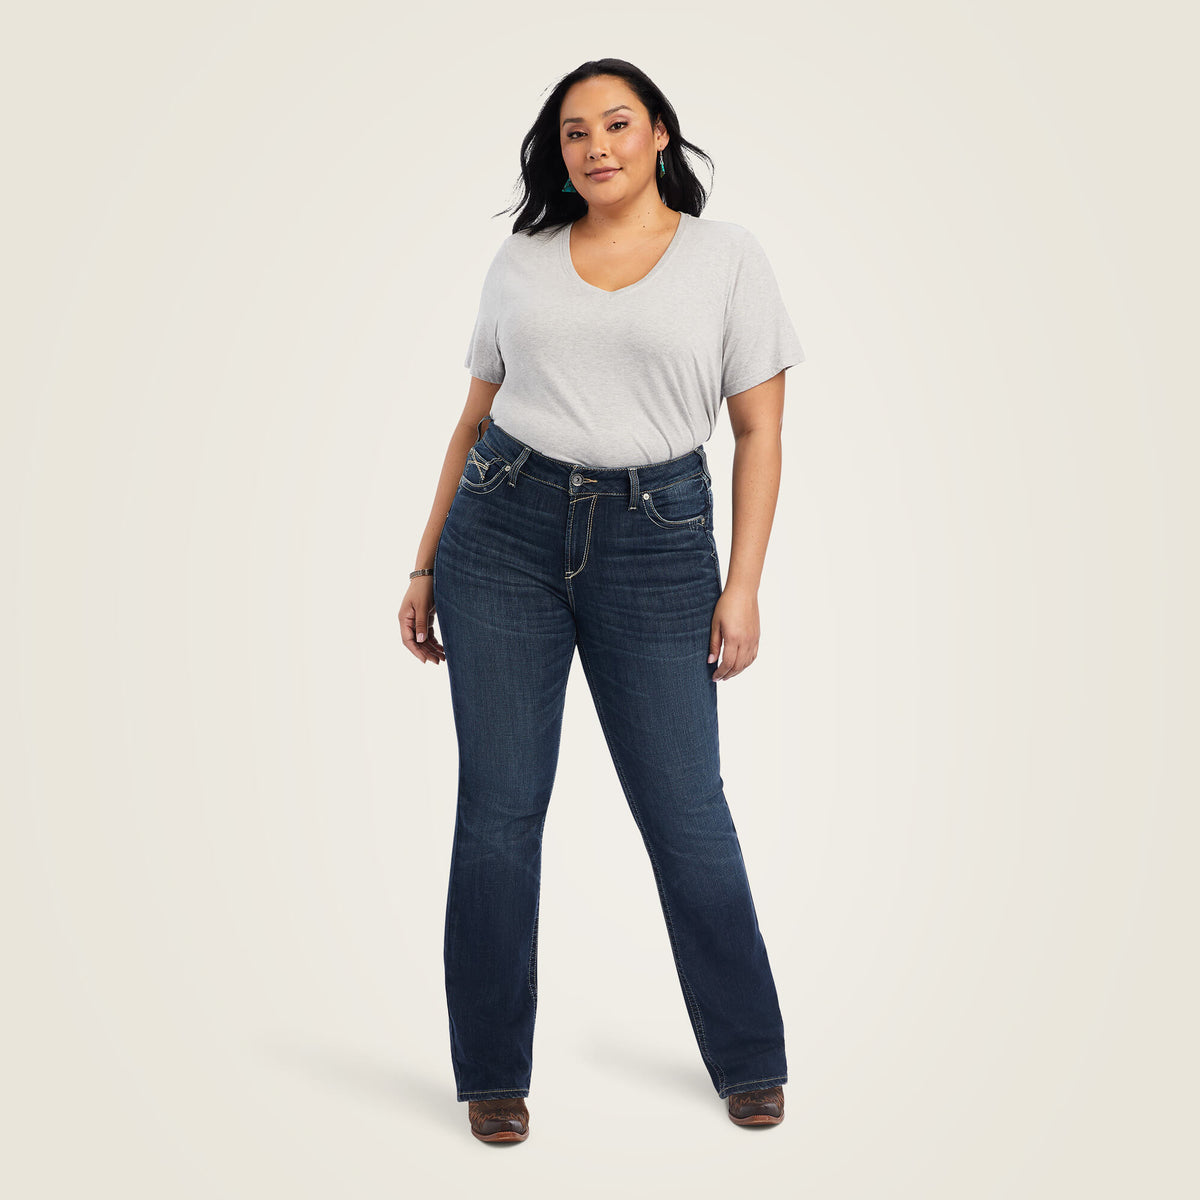 Ariat R.E.A.L. Women's Lexie Perfect Rise Bootcut Jean in Missouri (Available in Regular & Plus Sizes)